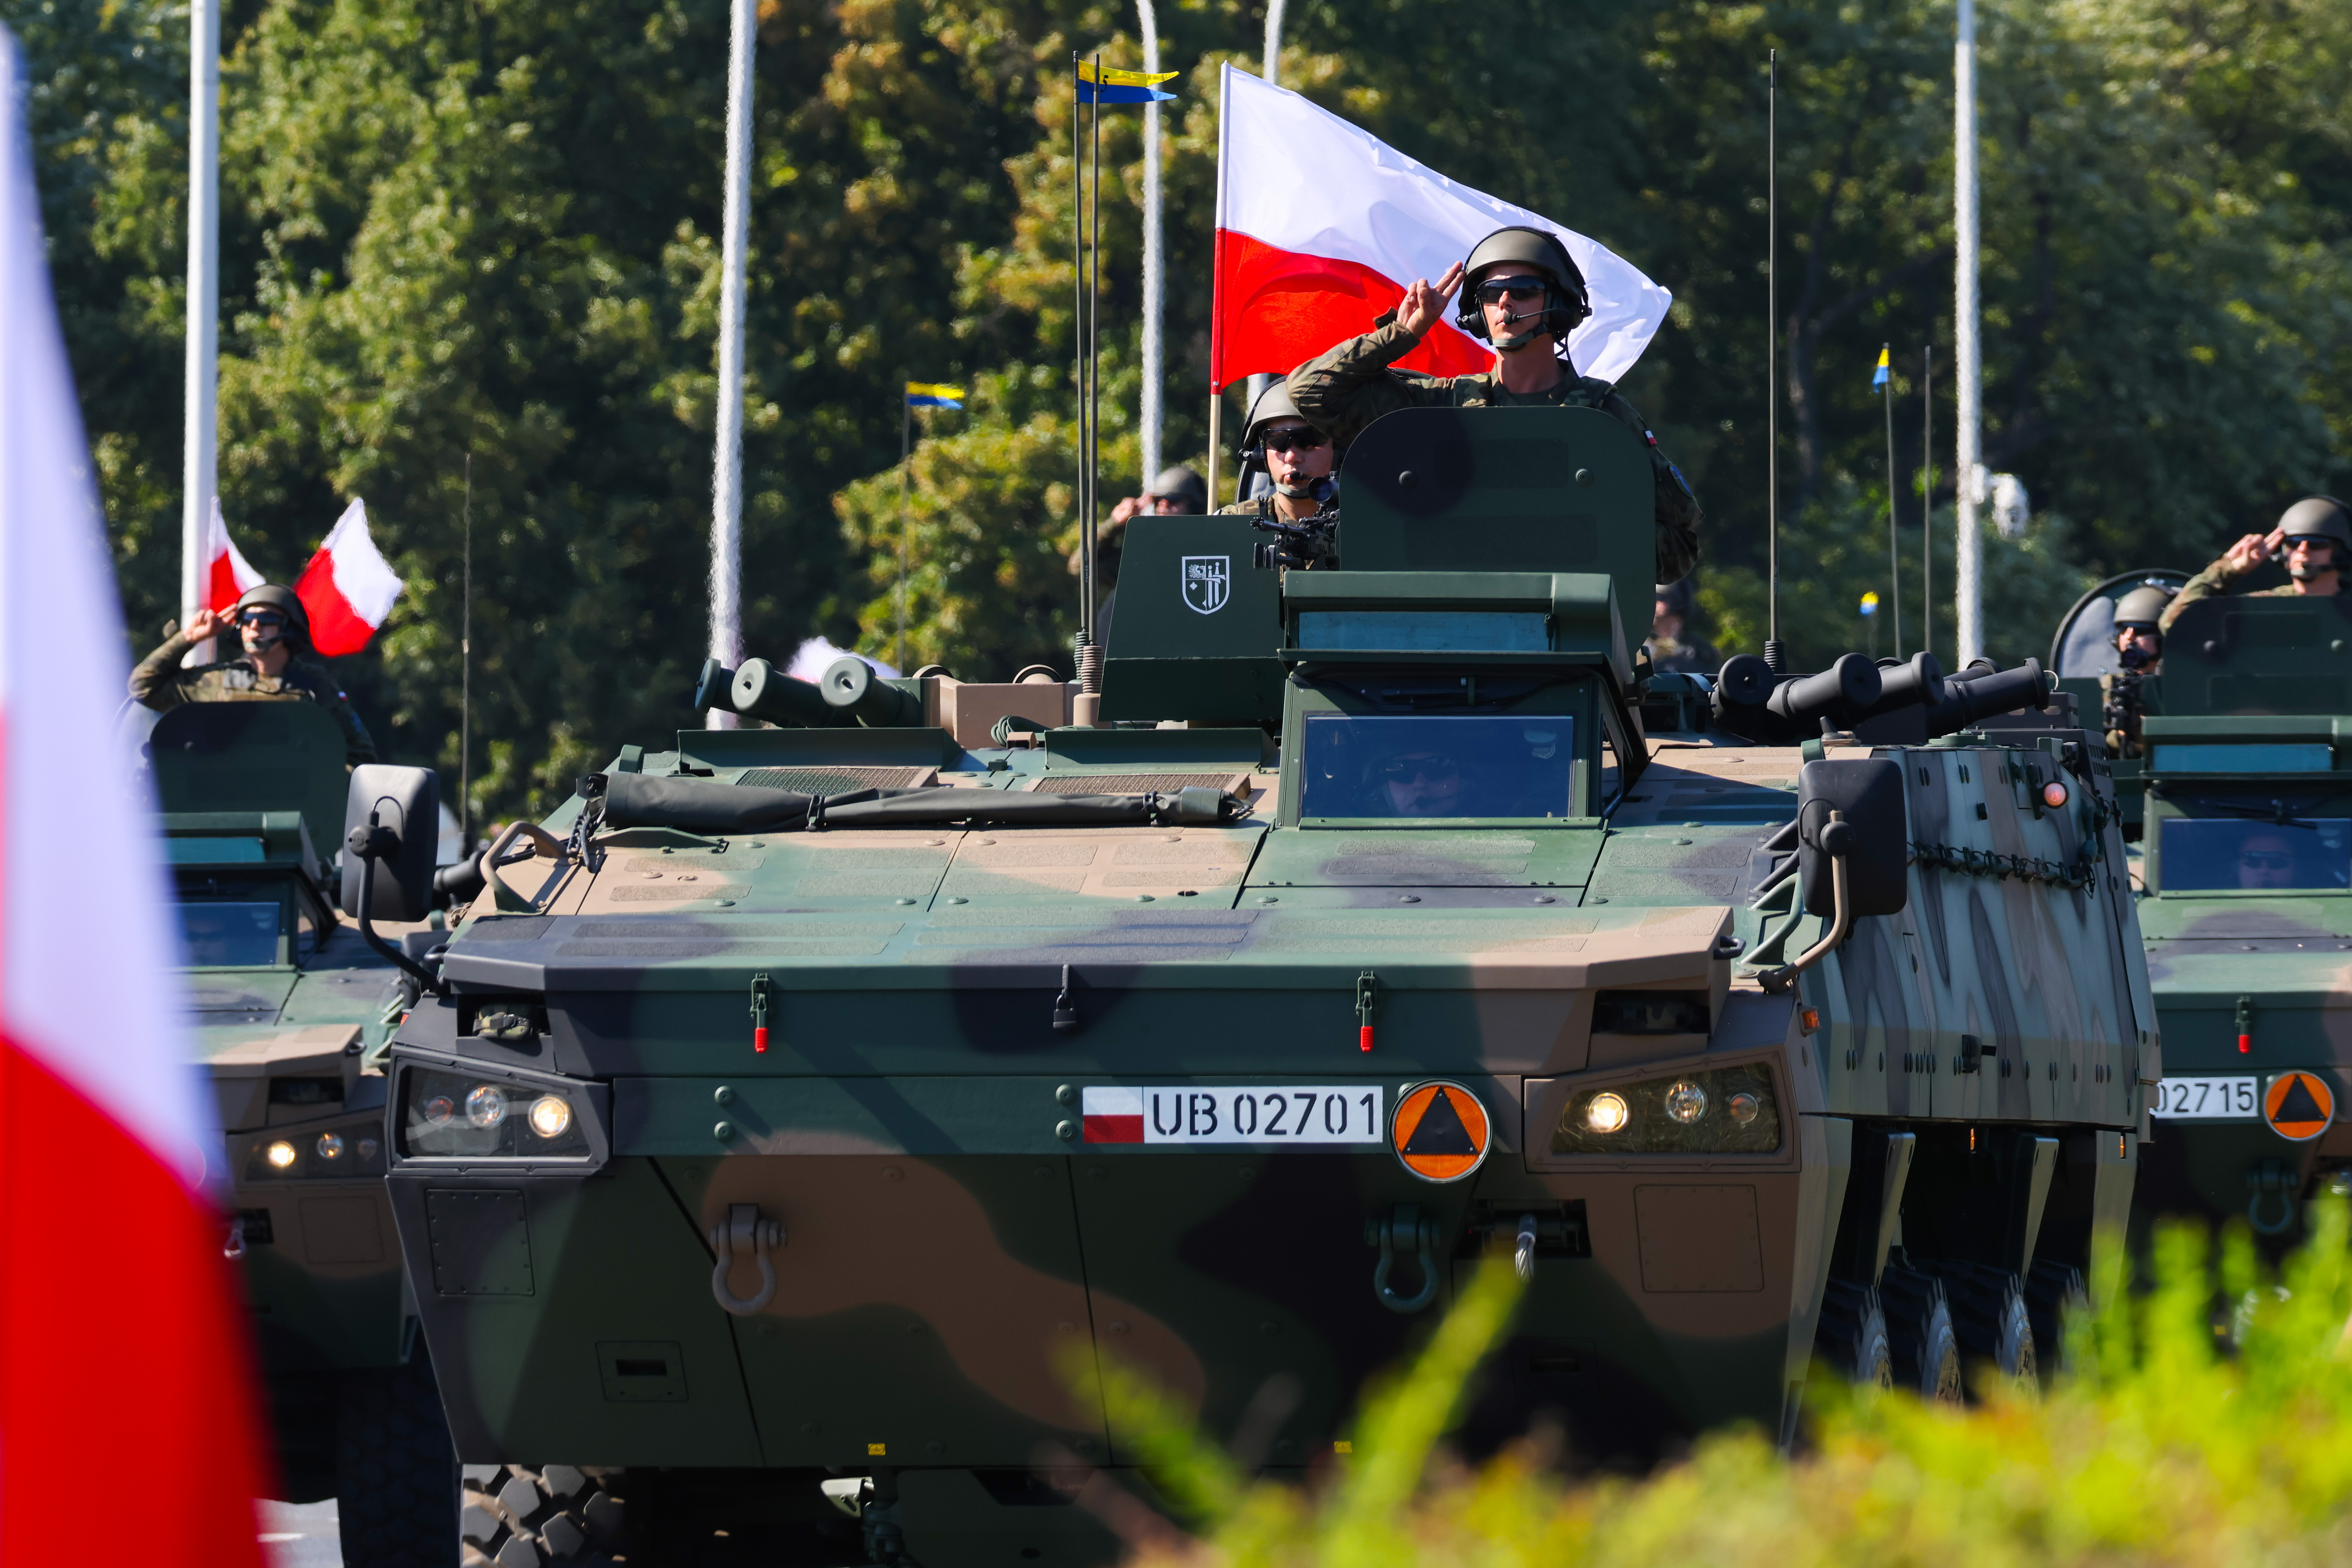 Unlike Britain, Poland has been investing millions into tanks, personnel and equipment